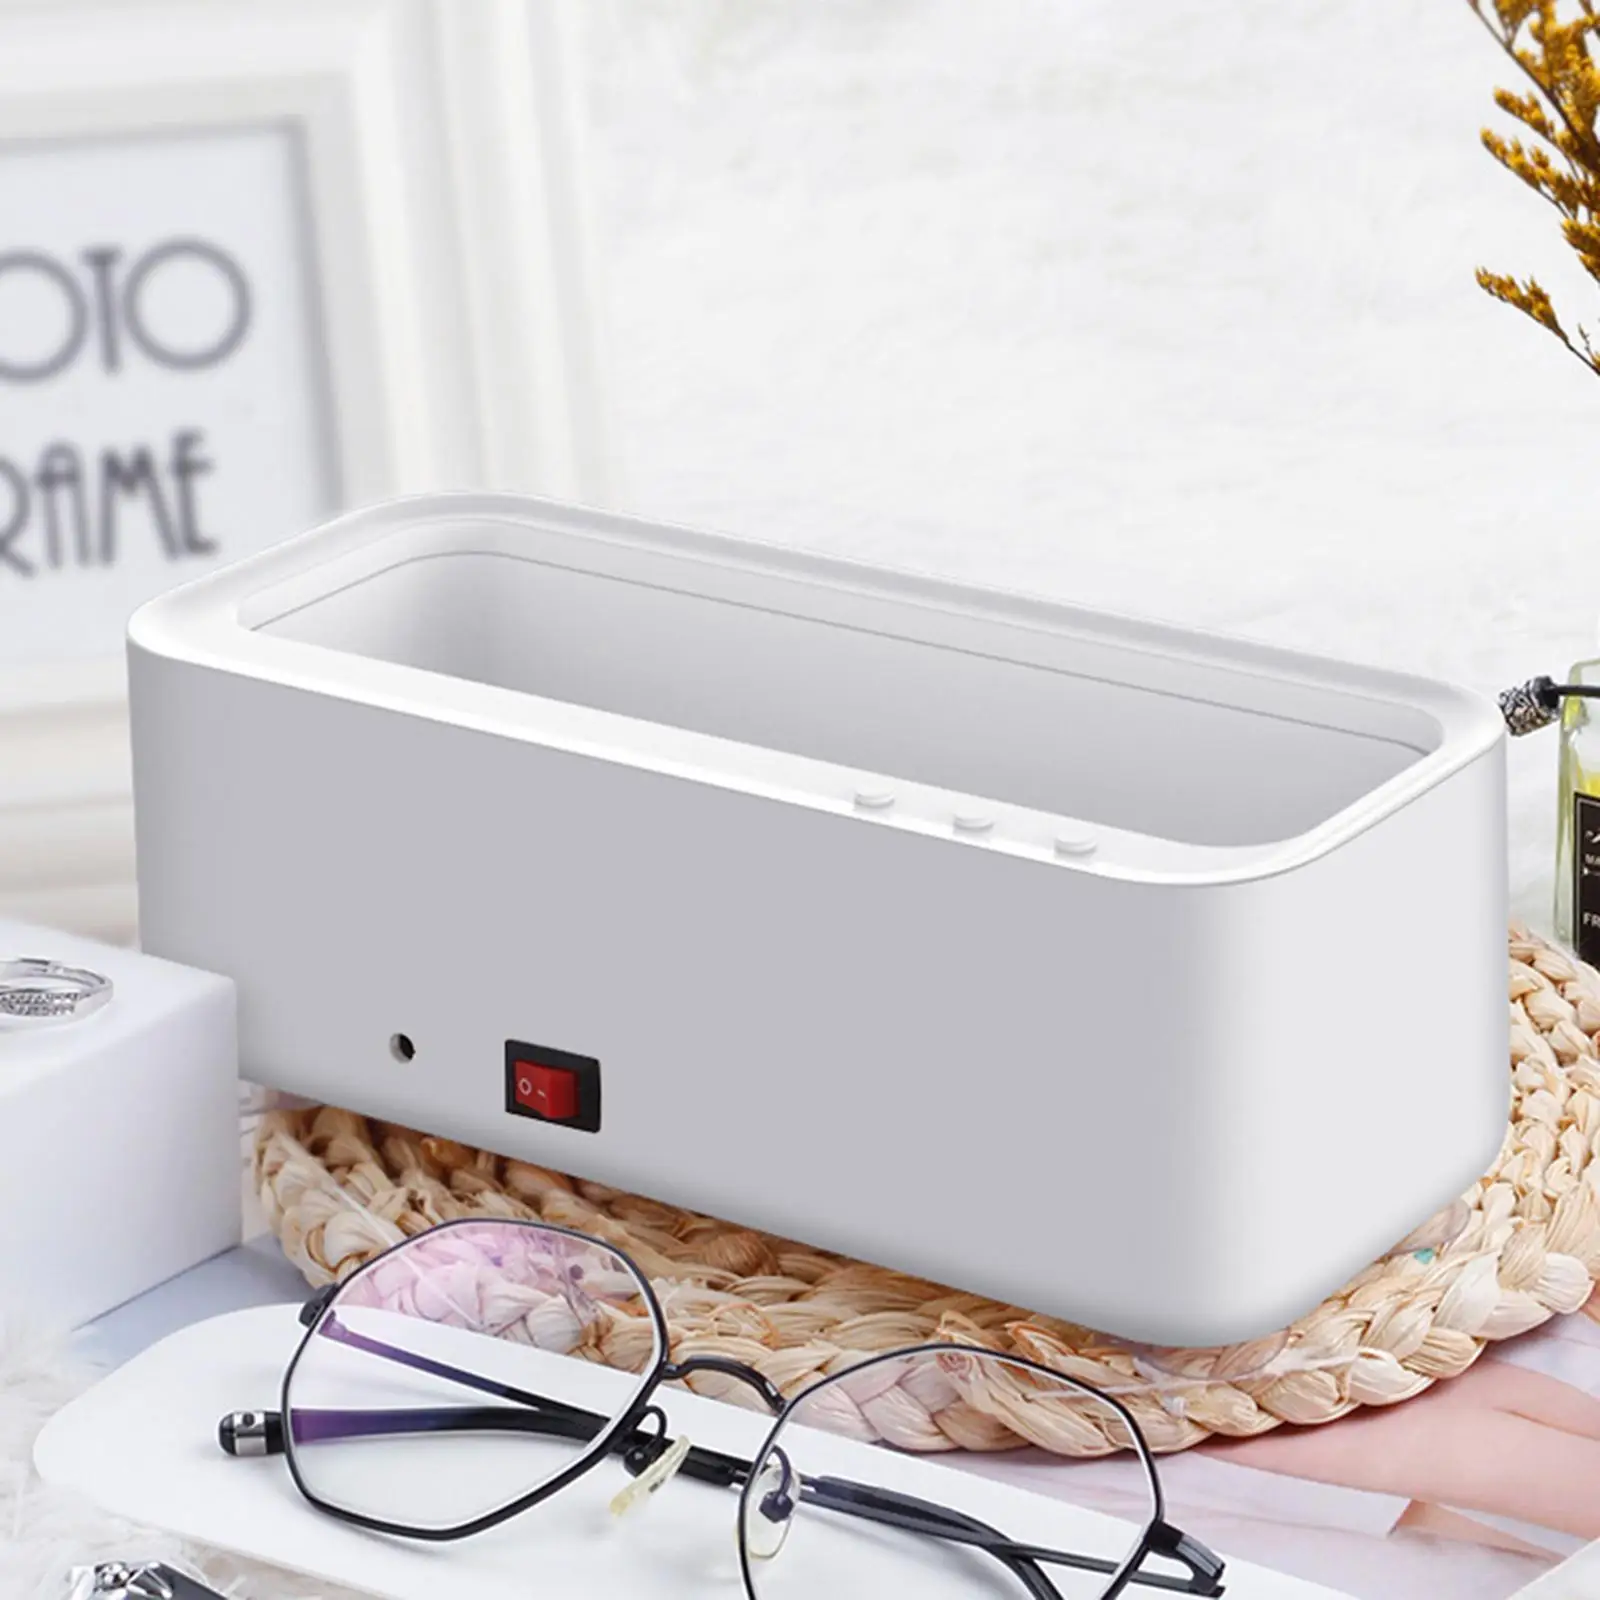 Portable Ultrasonic Cleaner Low Noise Electric Battery Powered Ultrasonic Cleaning Machine for Coin Eyeglasses Necklaces Rings